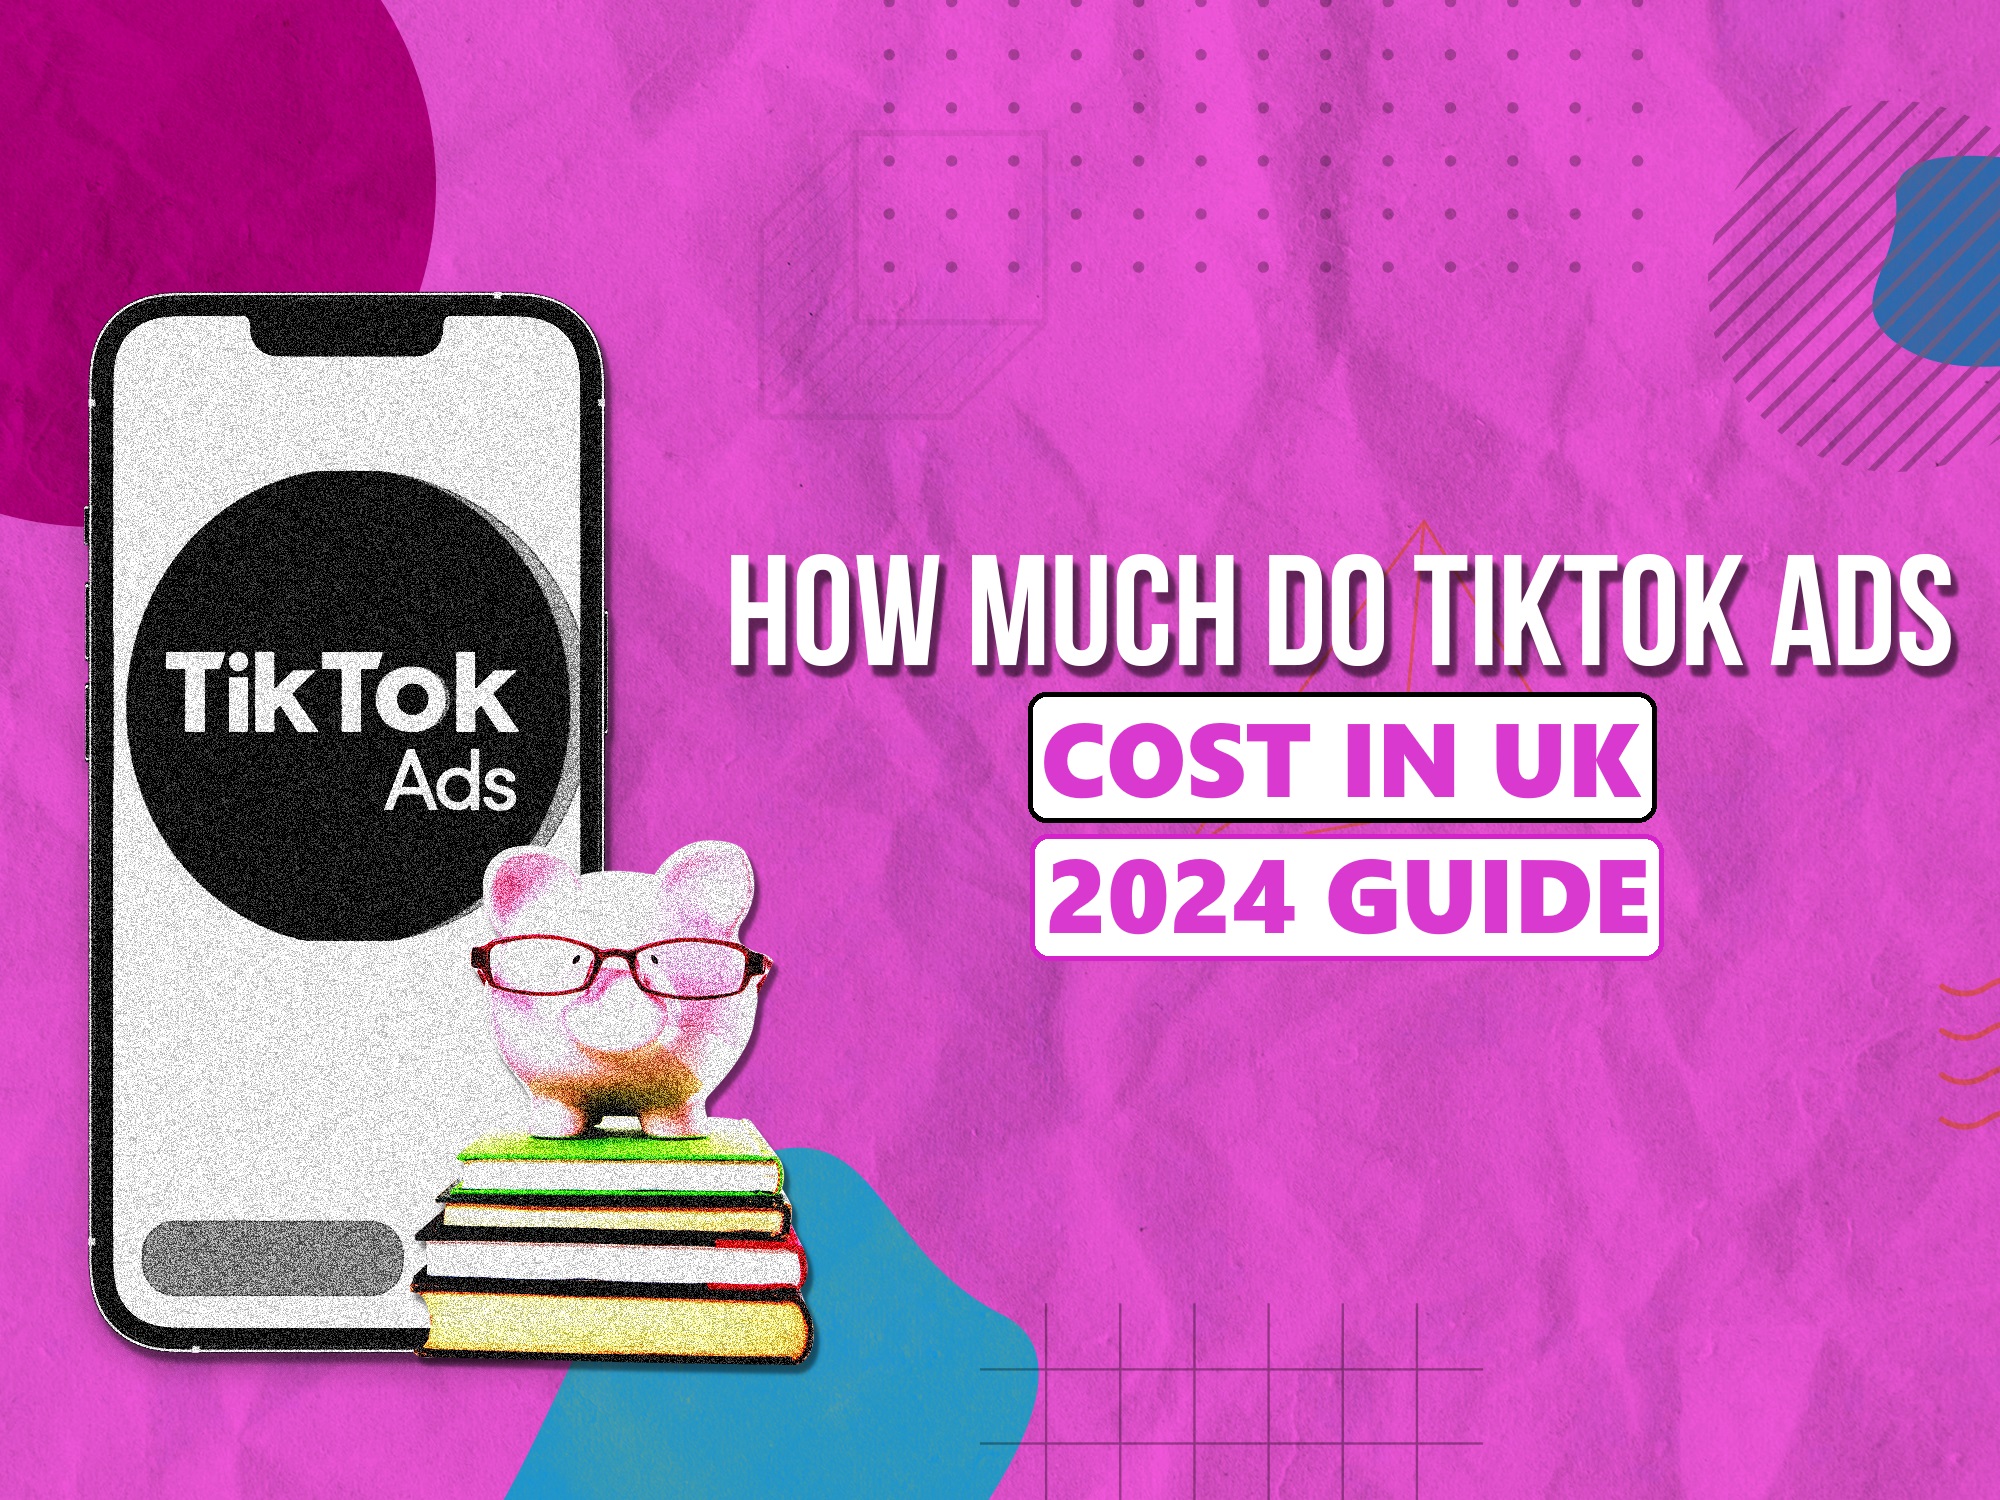 How much do Tiktok Ads Cost UK in 2024